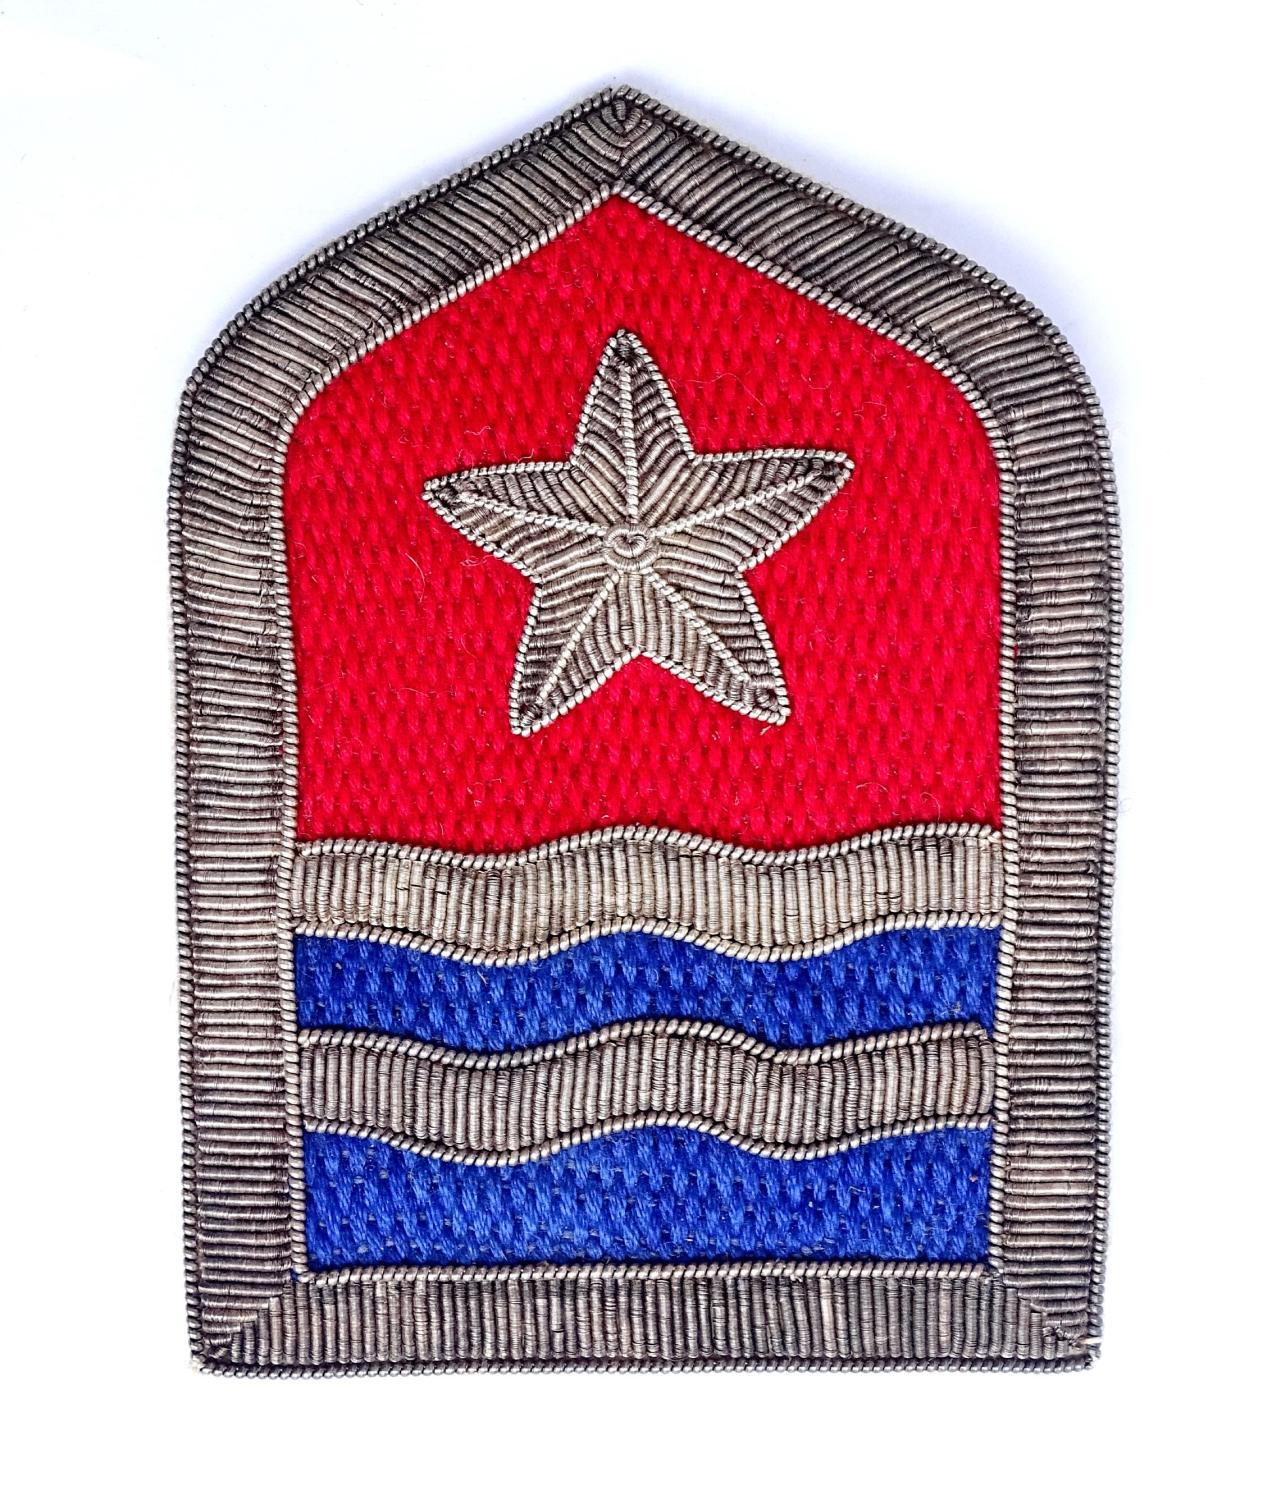 Patch U.S. Army  Middle East Command  Cannetille argent